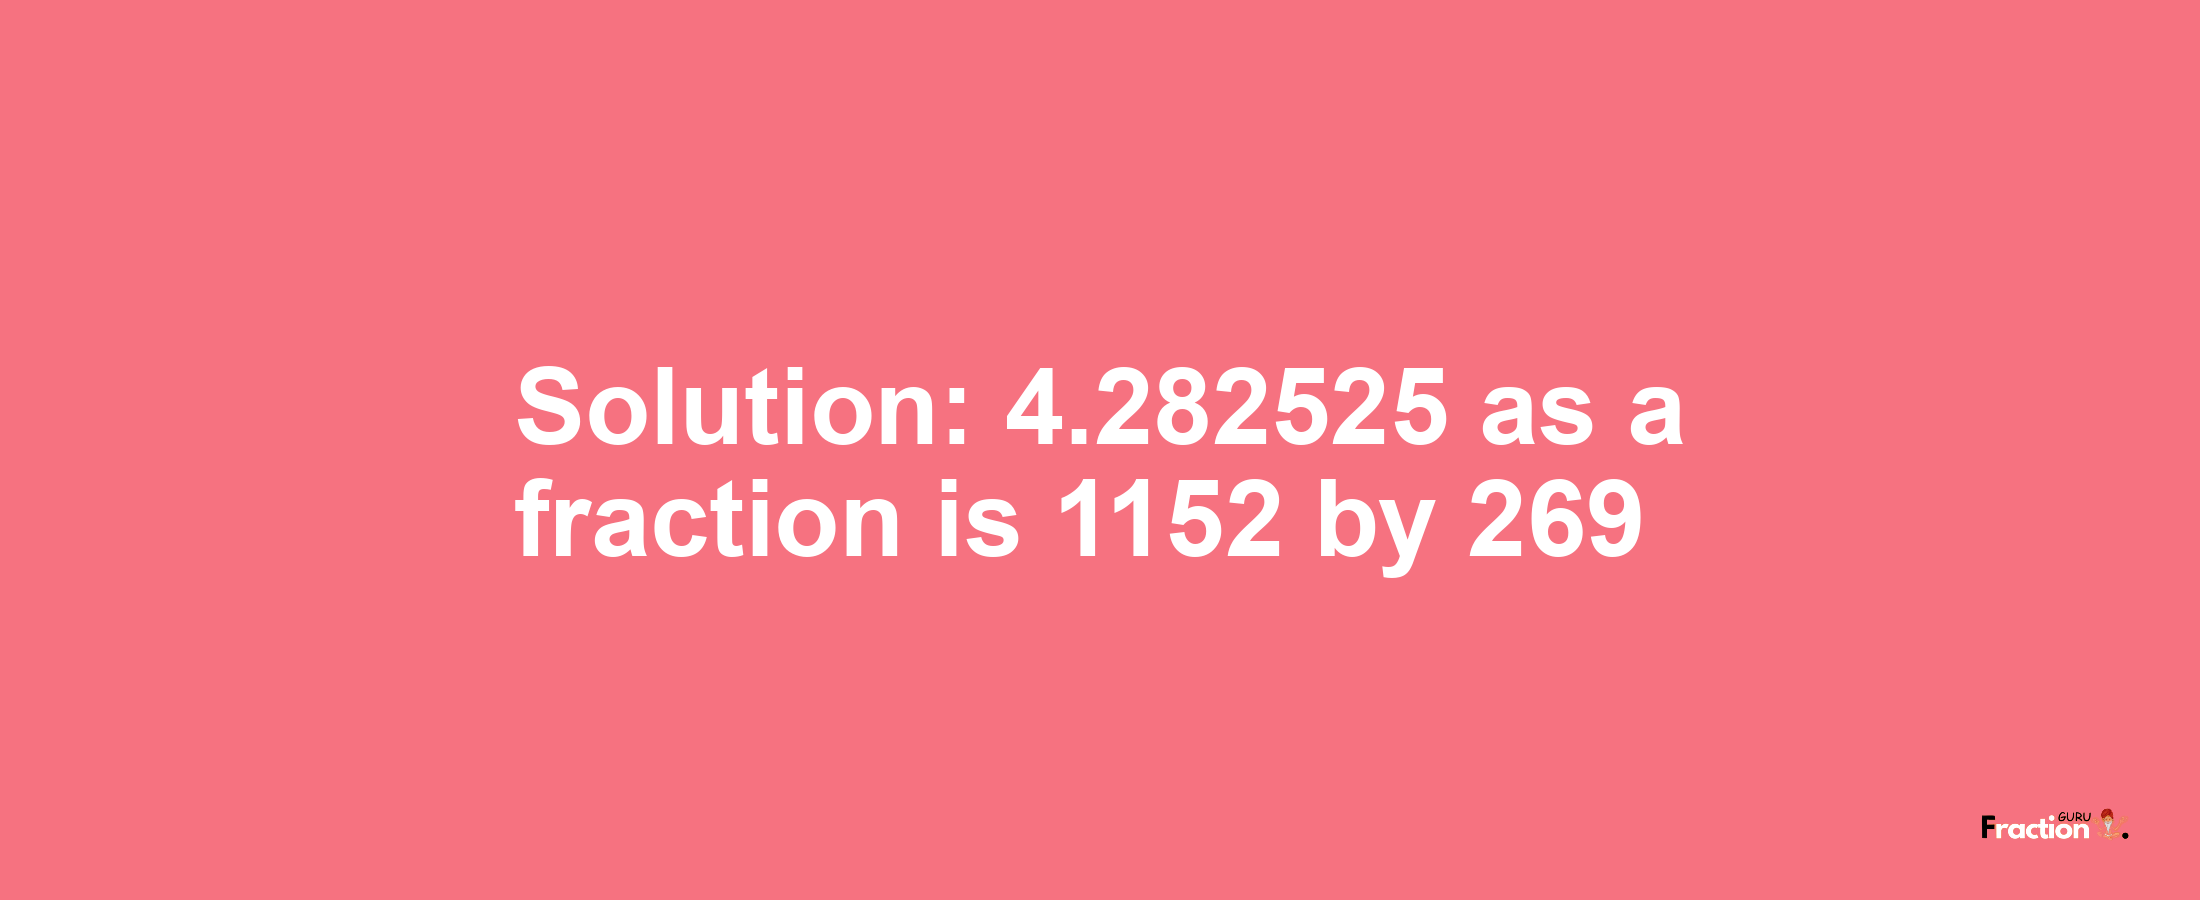 Solution:4.282525 as a fraction is 1152/269